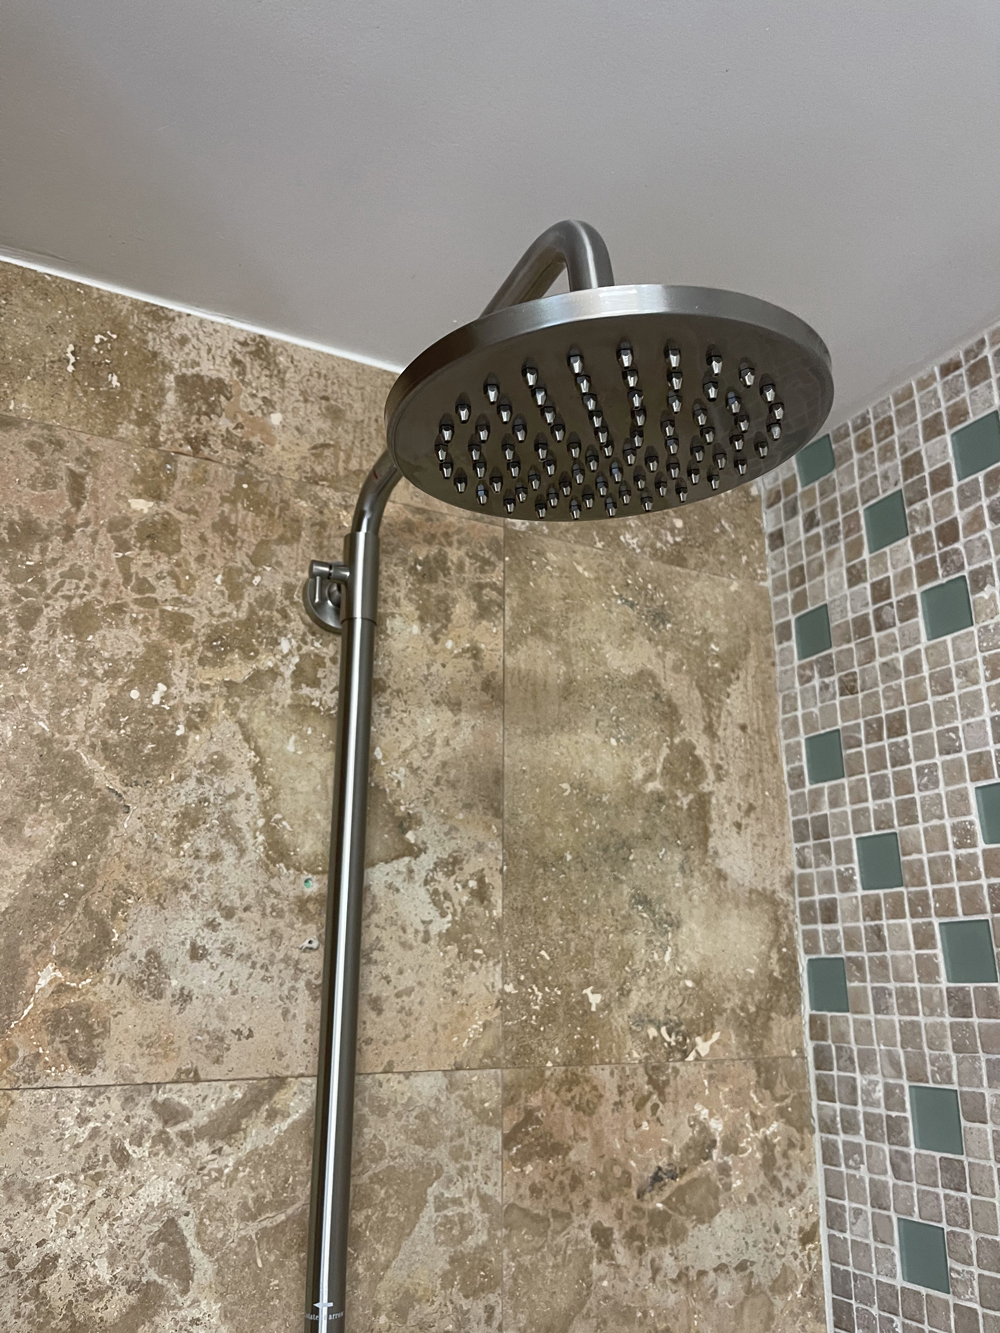 Shower Head Installation in Miami - Residential Plumbing